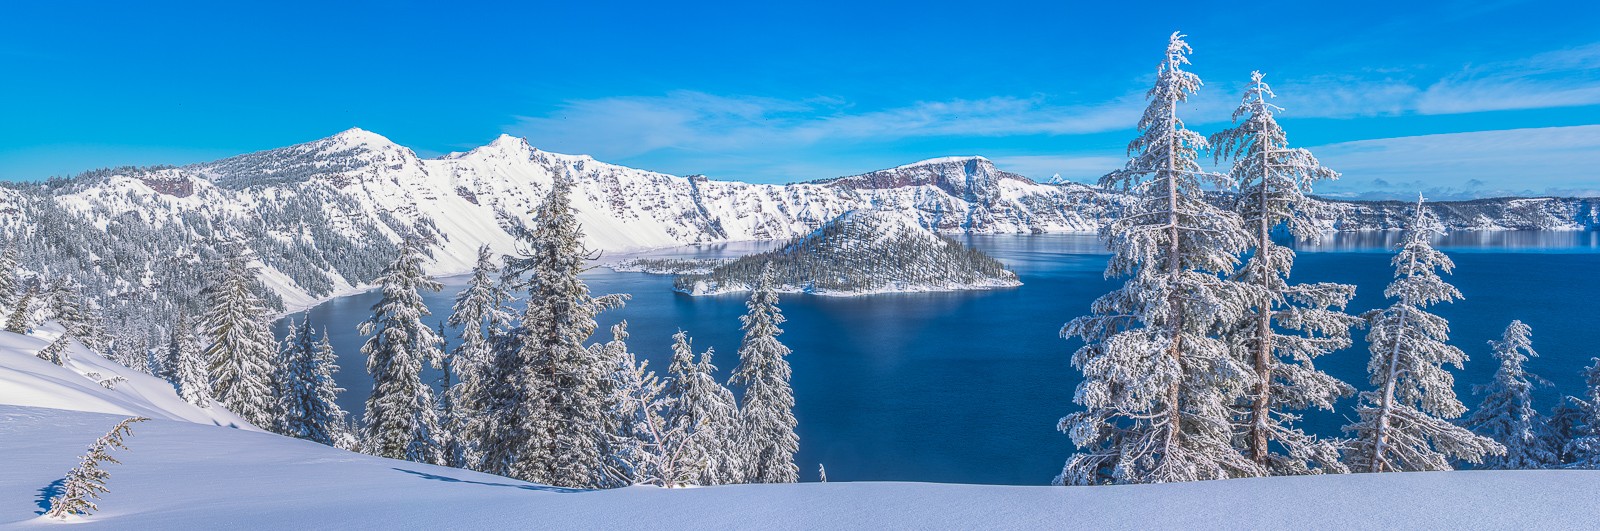 After a fresh coat of snow Crater Lake is encapsulated.